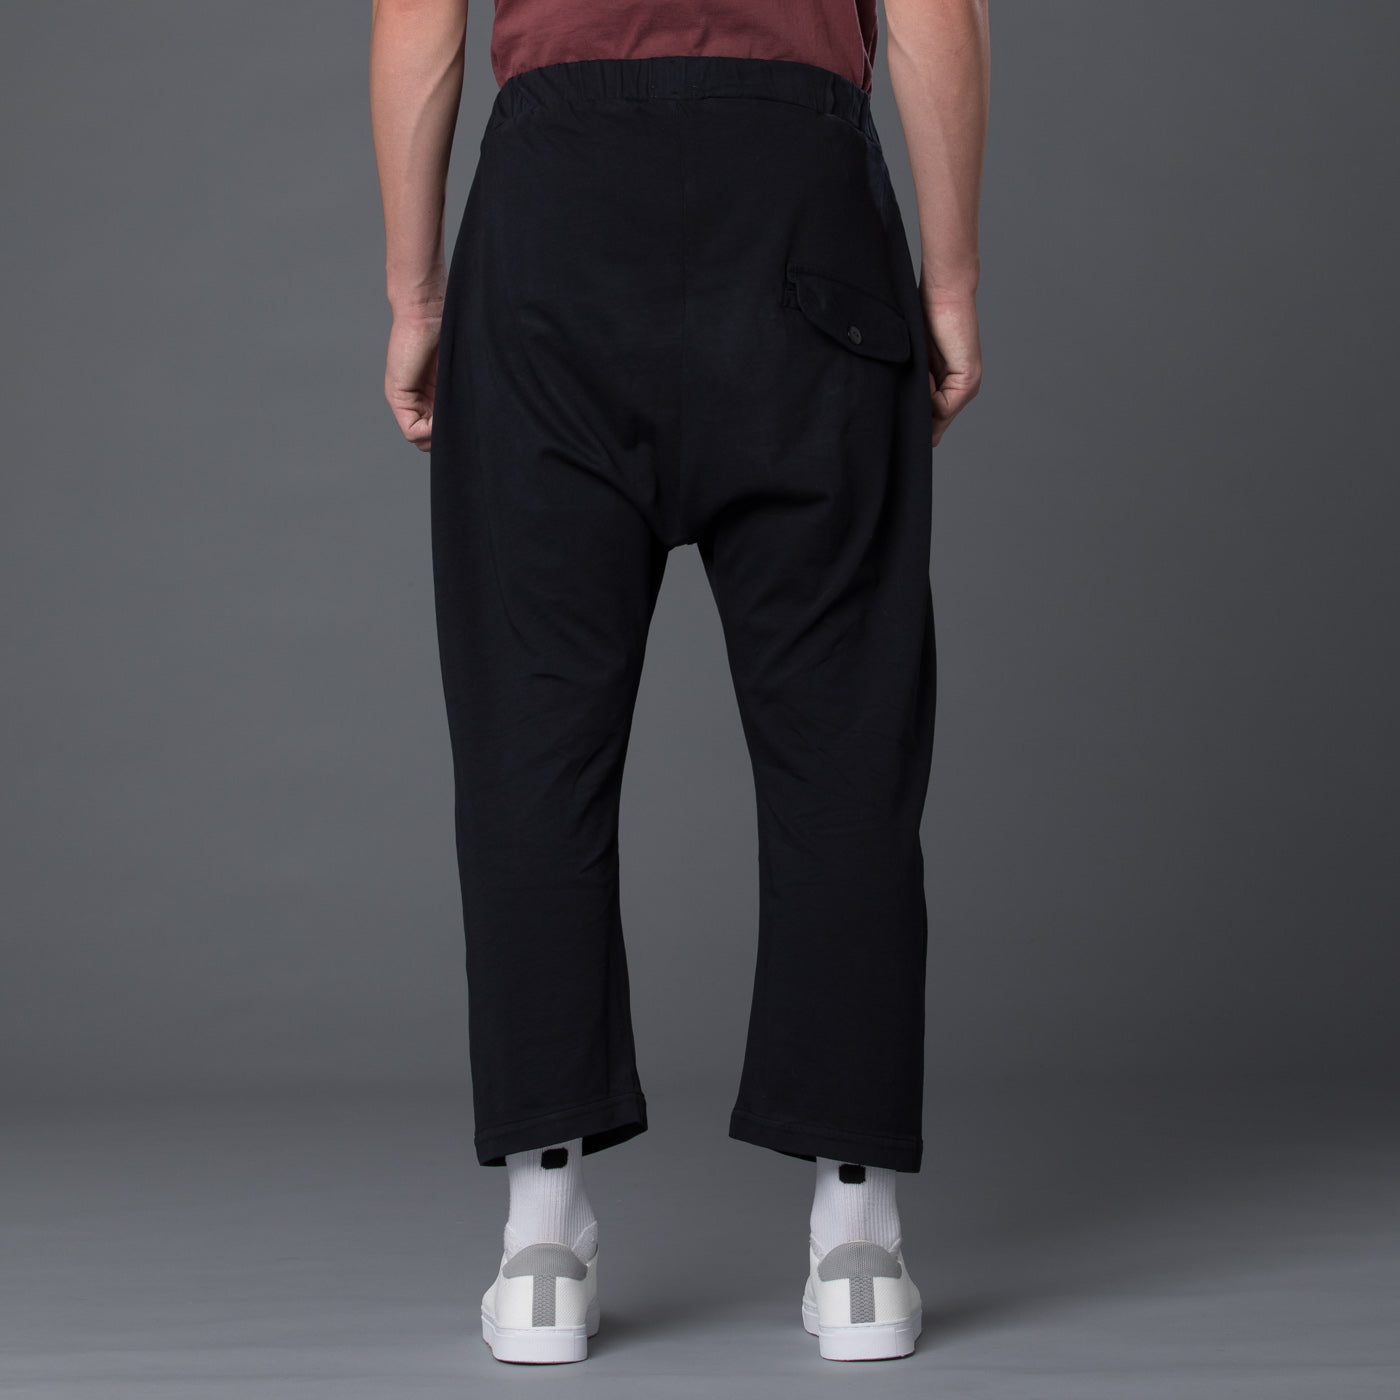 Willy Chavarria Relaxed Fit Pant